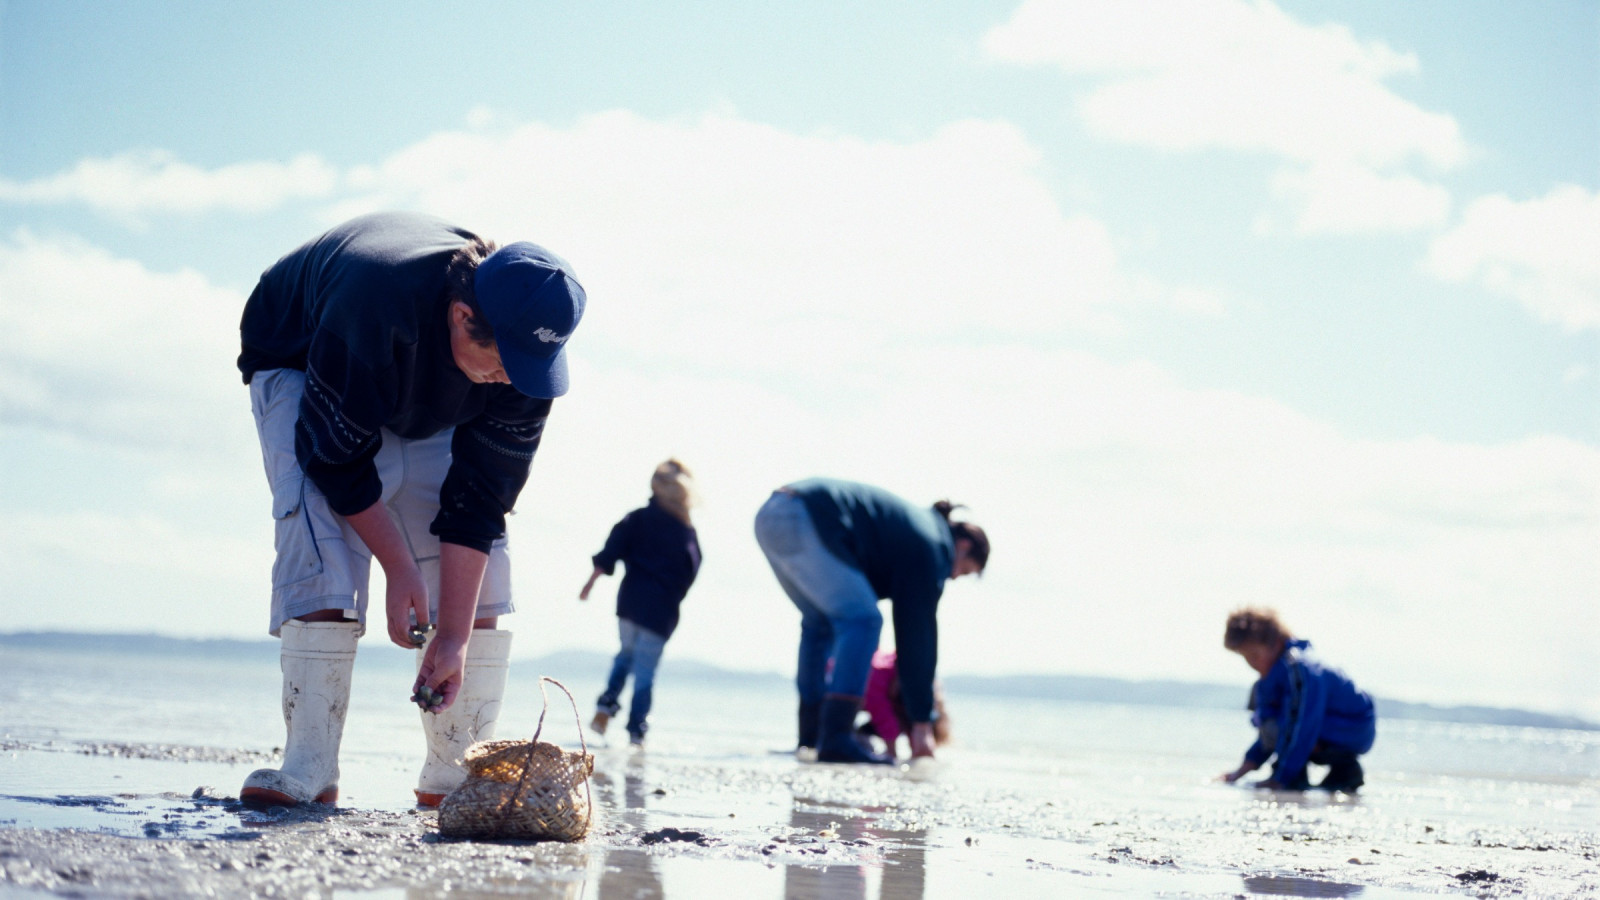 A group of people collecting shell fish at low tide.